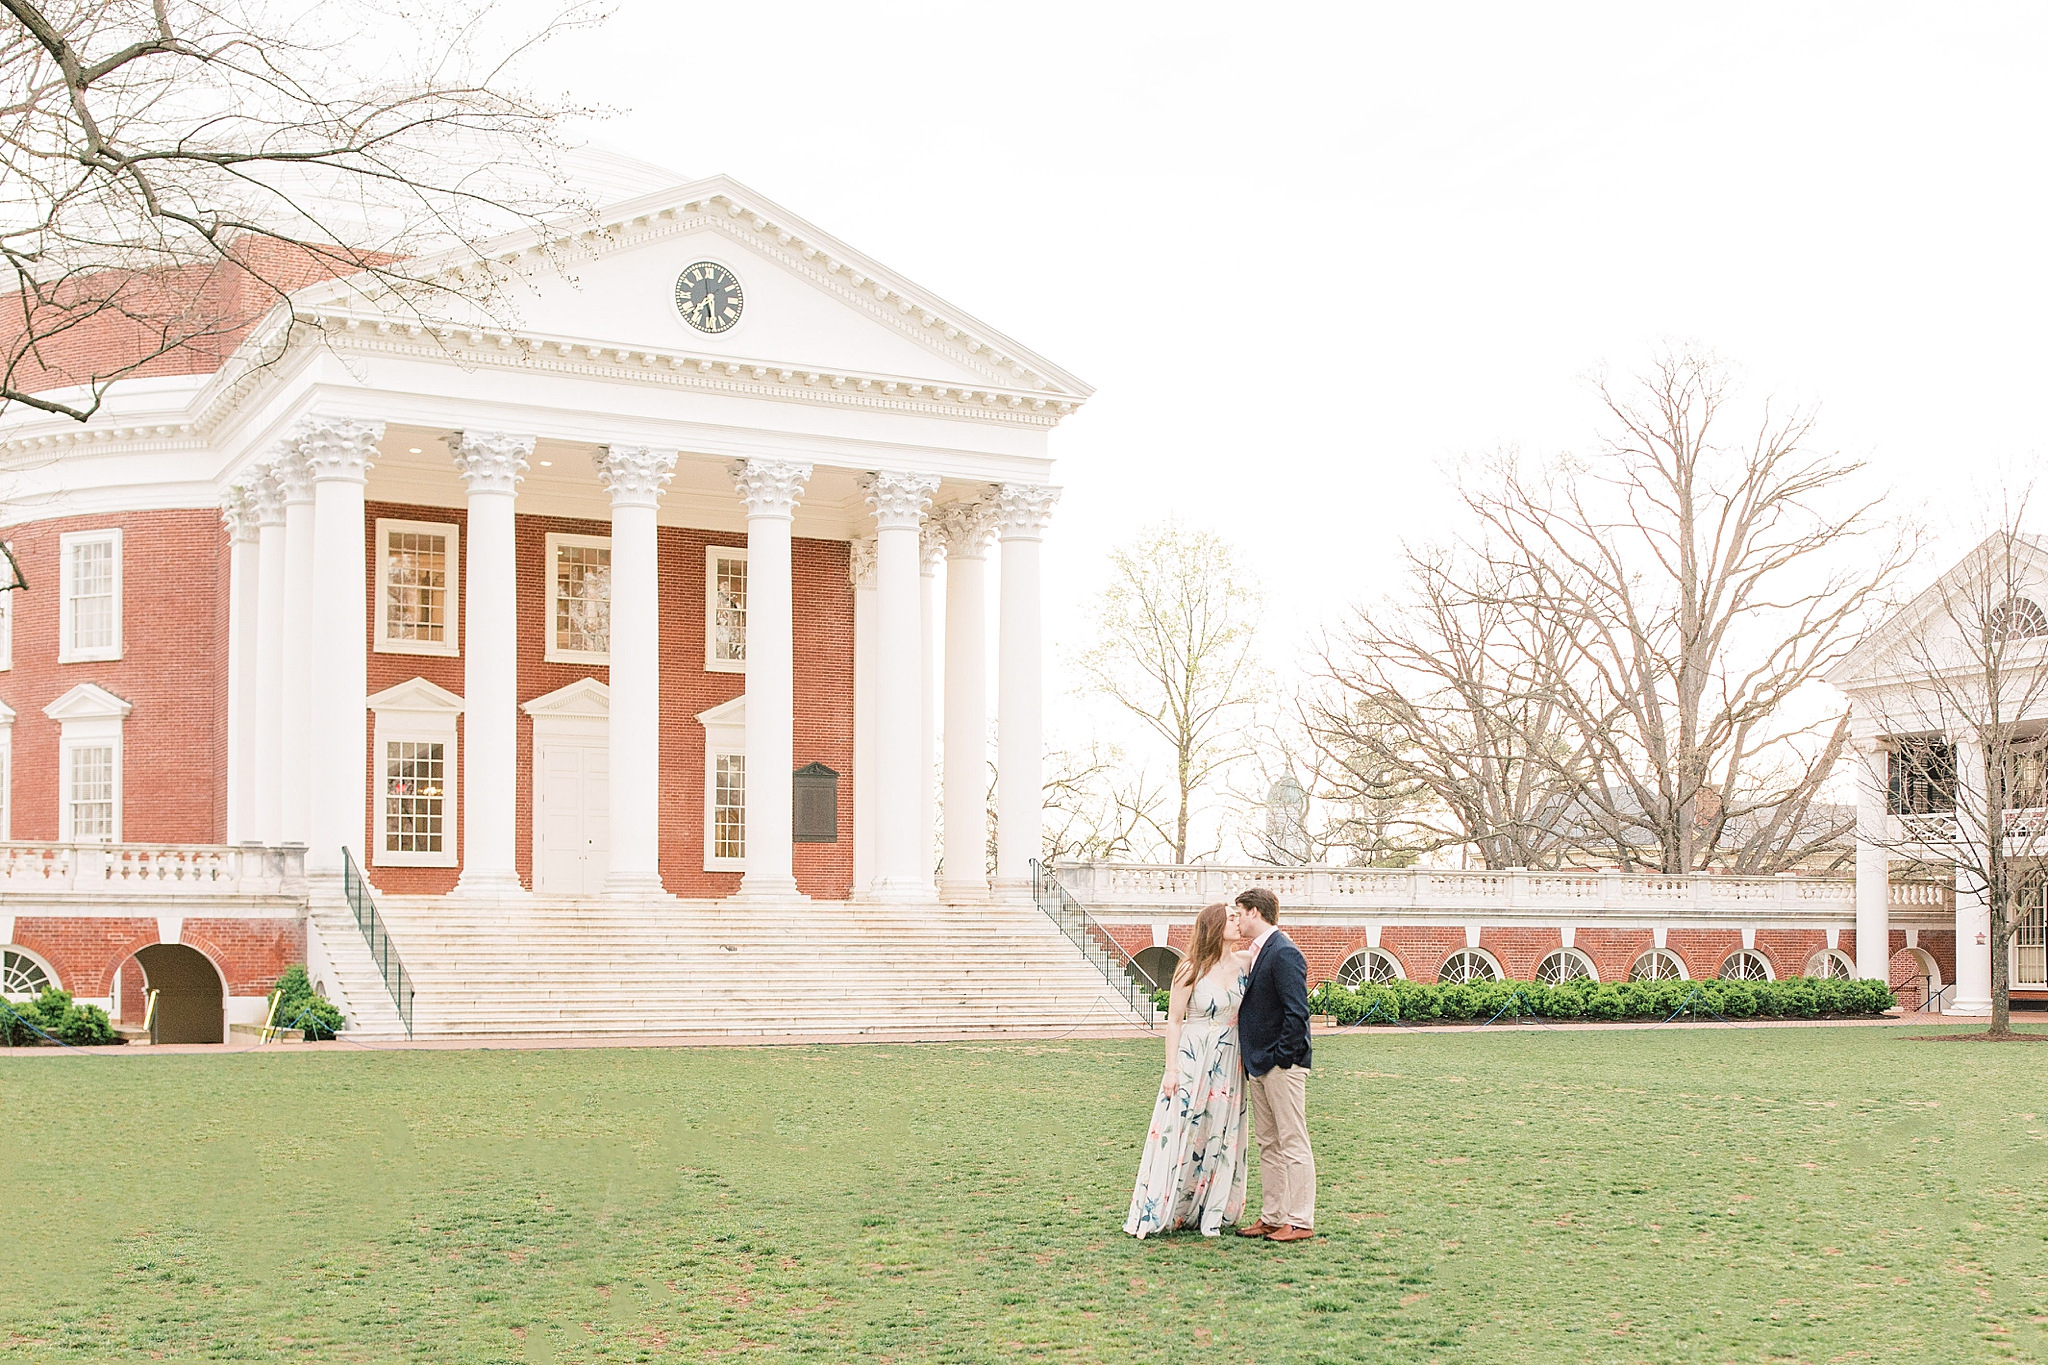 This fine art engagement session on the beautiful campus at the University of Virginia (UVA) includes the Rotunda, gardens, and other historic sites.  